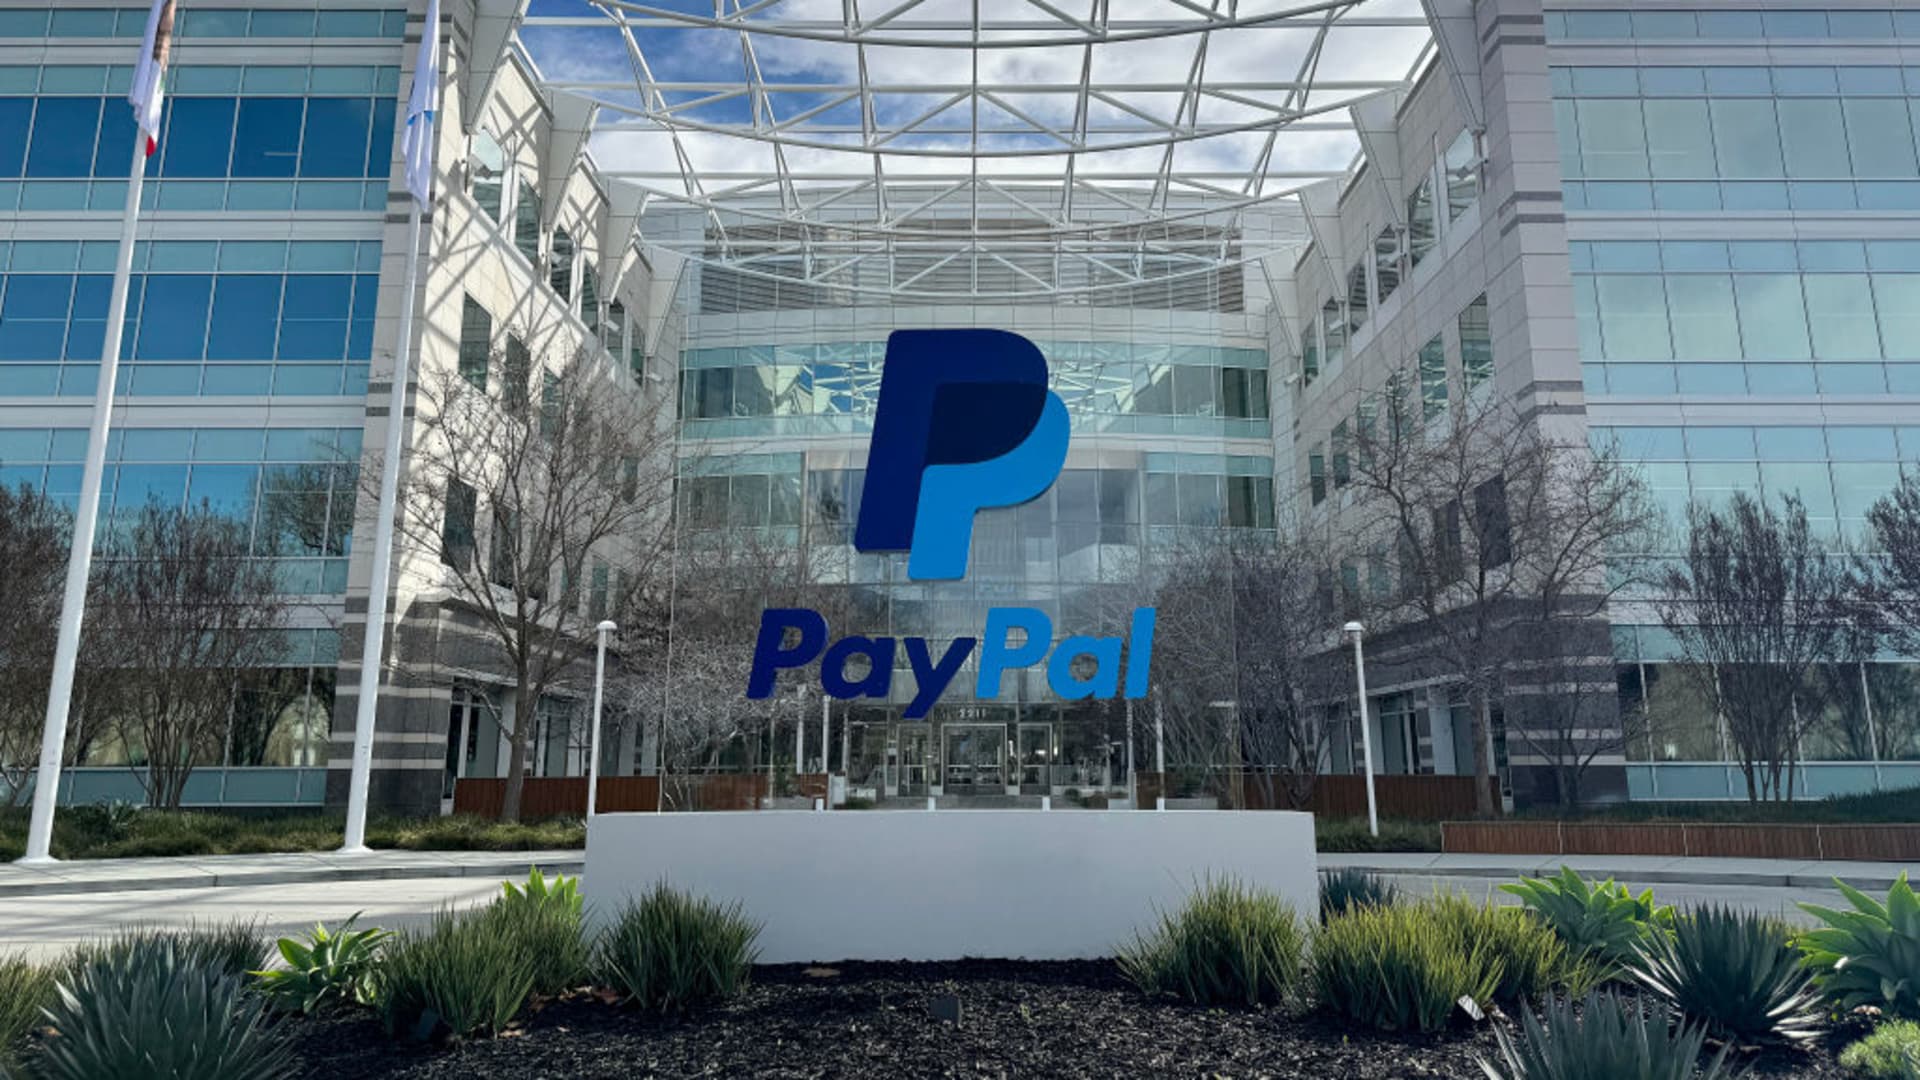 PayPal issues disappointing guidance even as fourth-quarter earnings top estimates